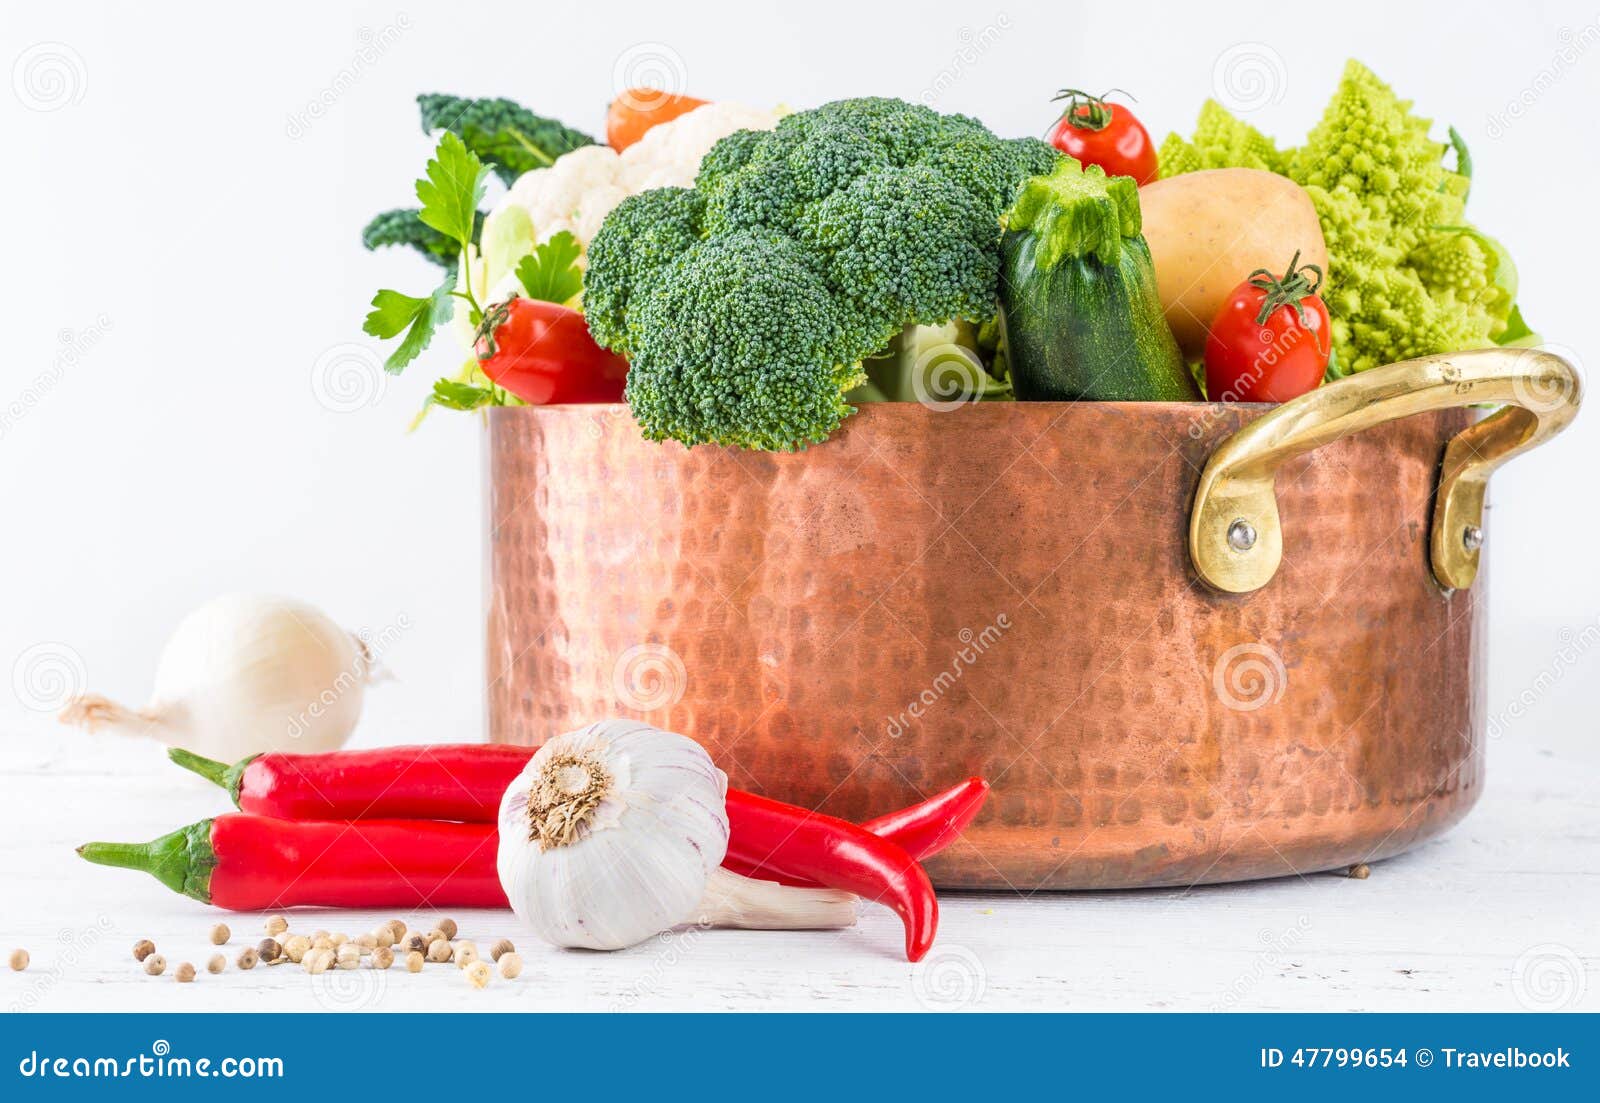 Vegetables in copper pot. stock photo. Image of color - 47799654